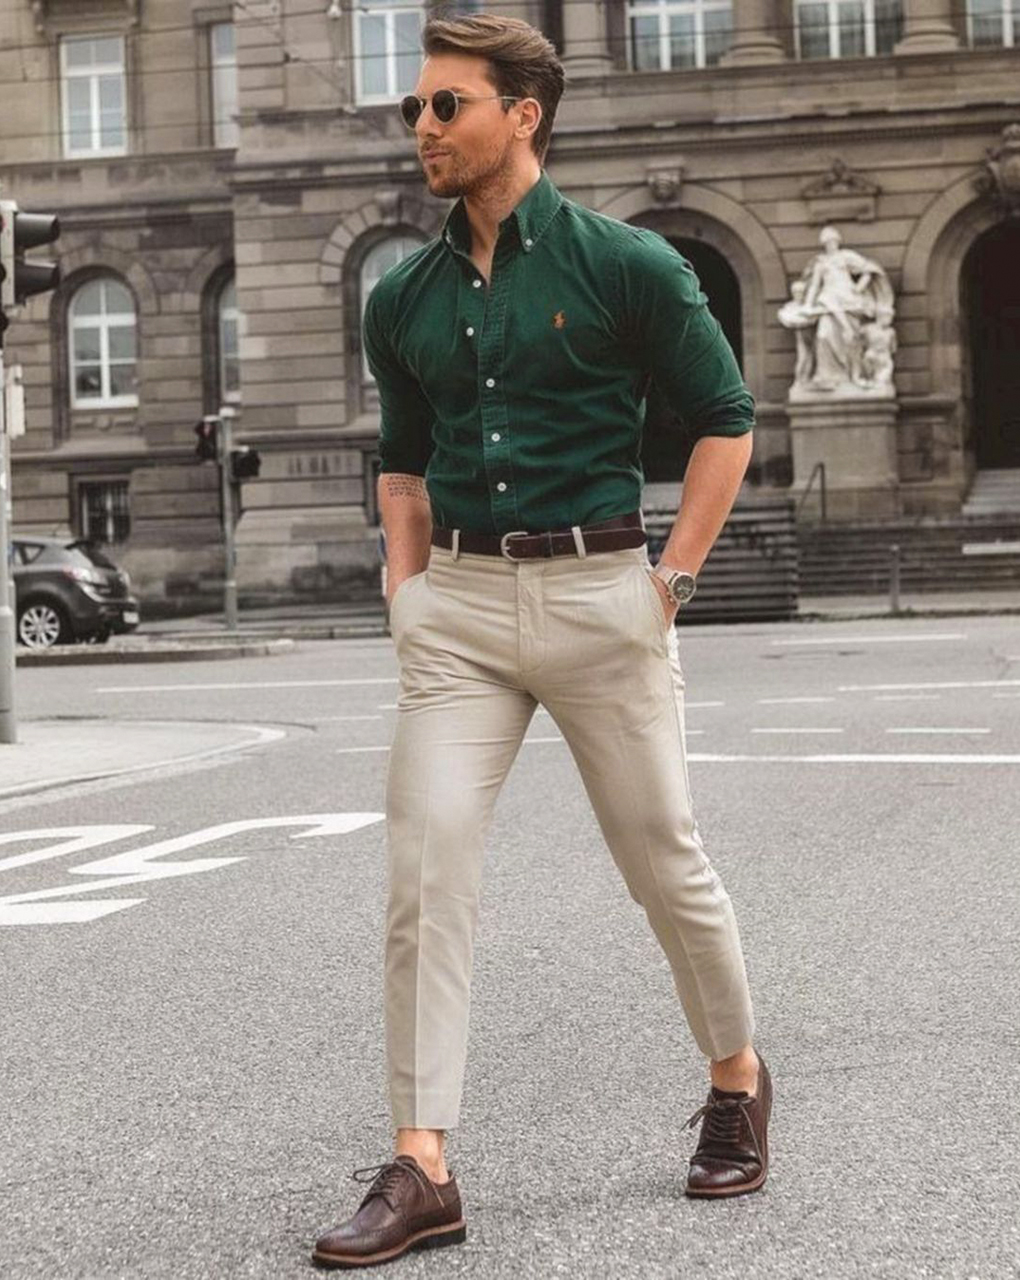 Green shirt, tan pants, brown loafers, and brown belt